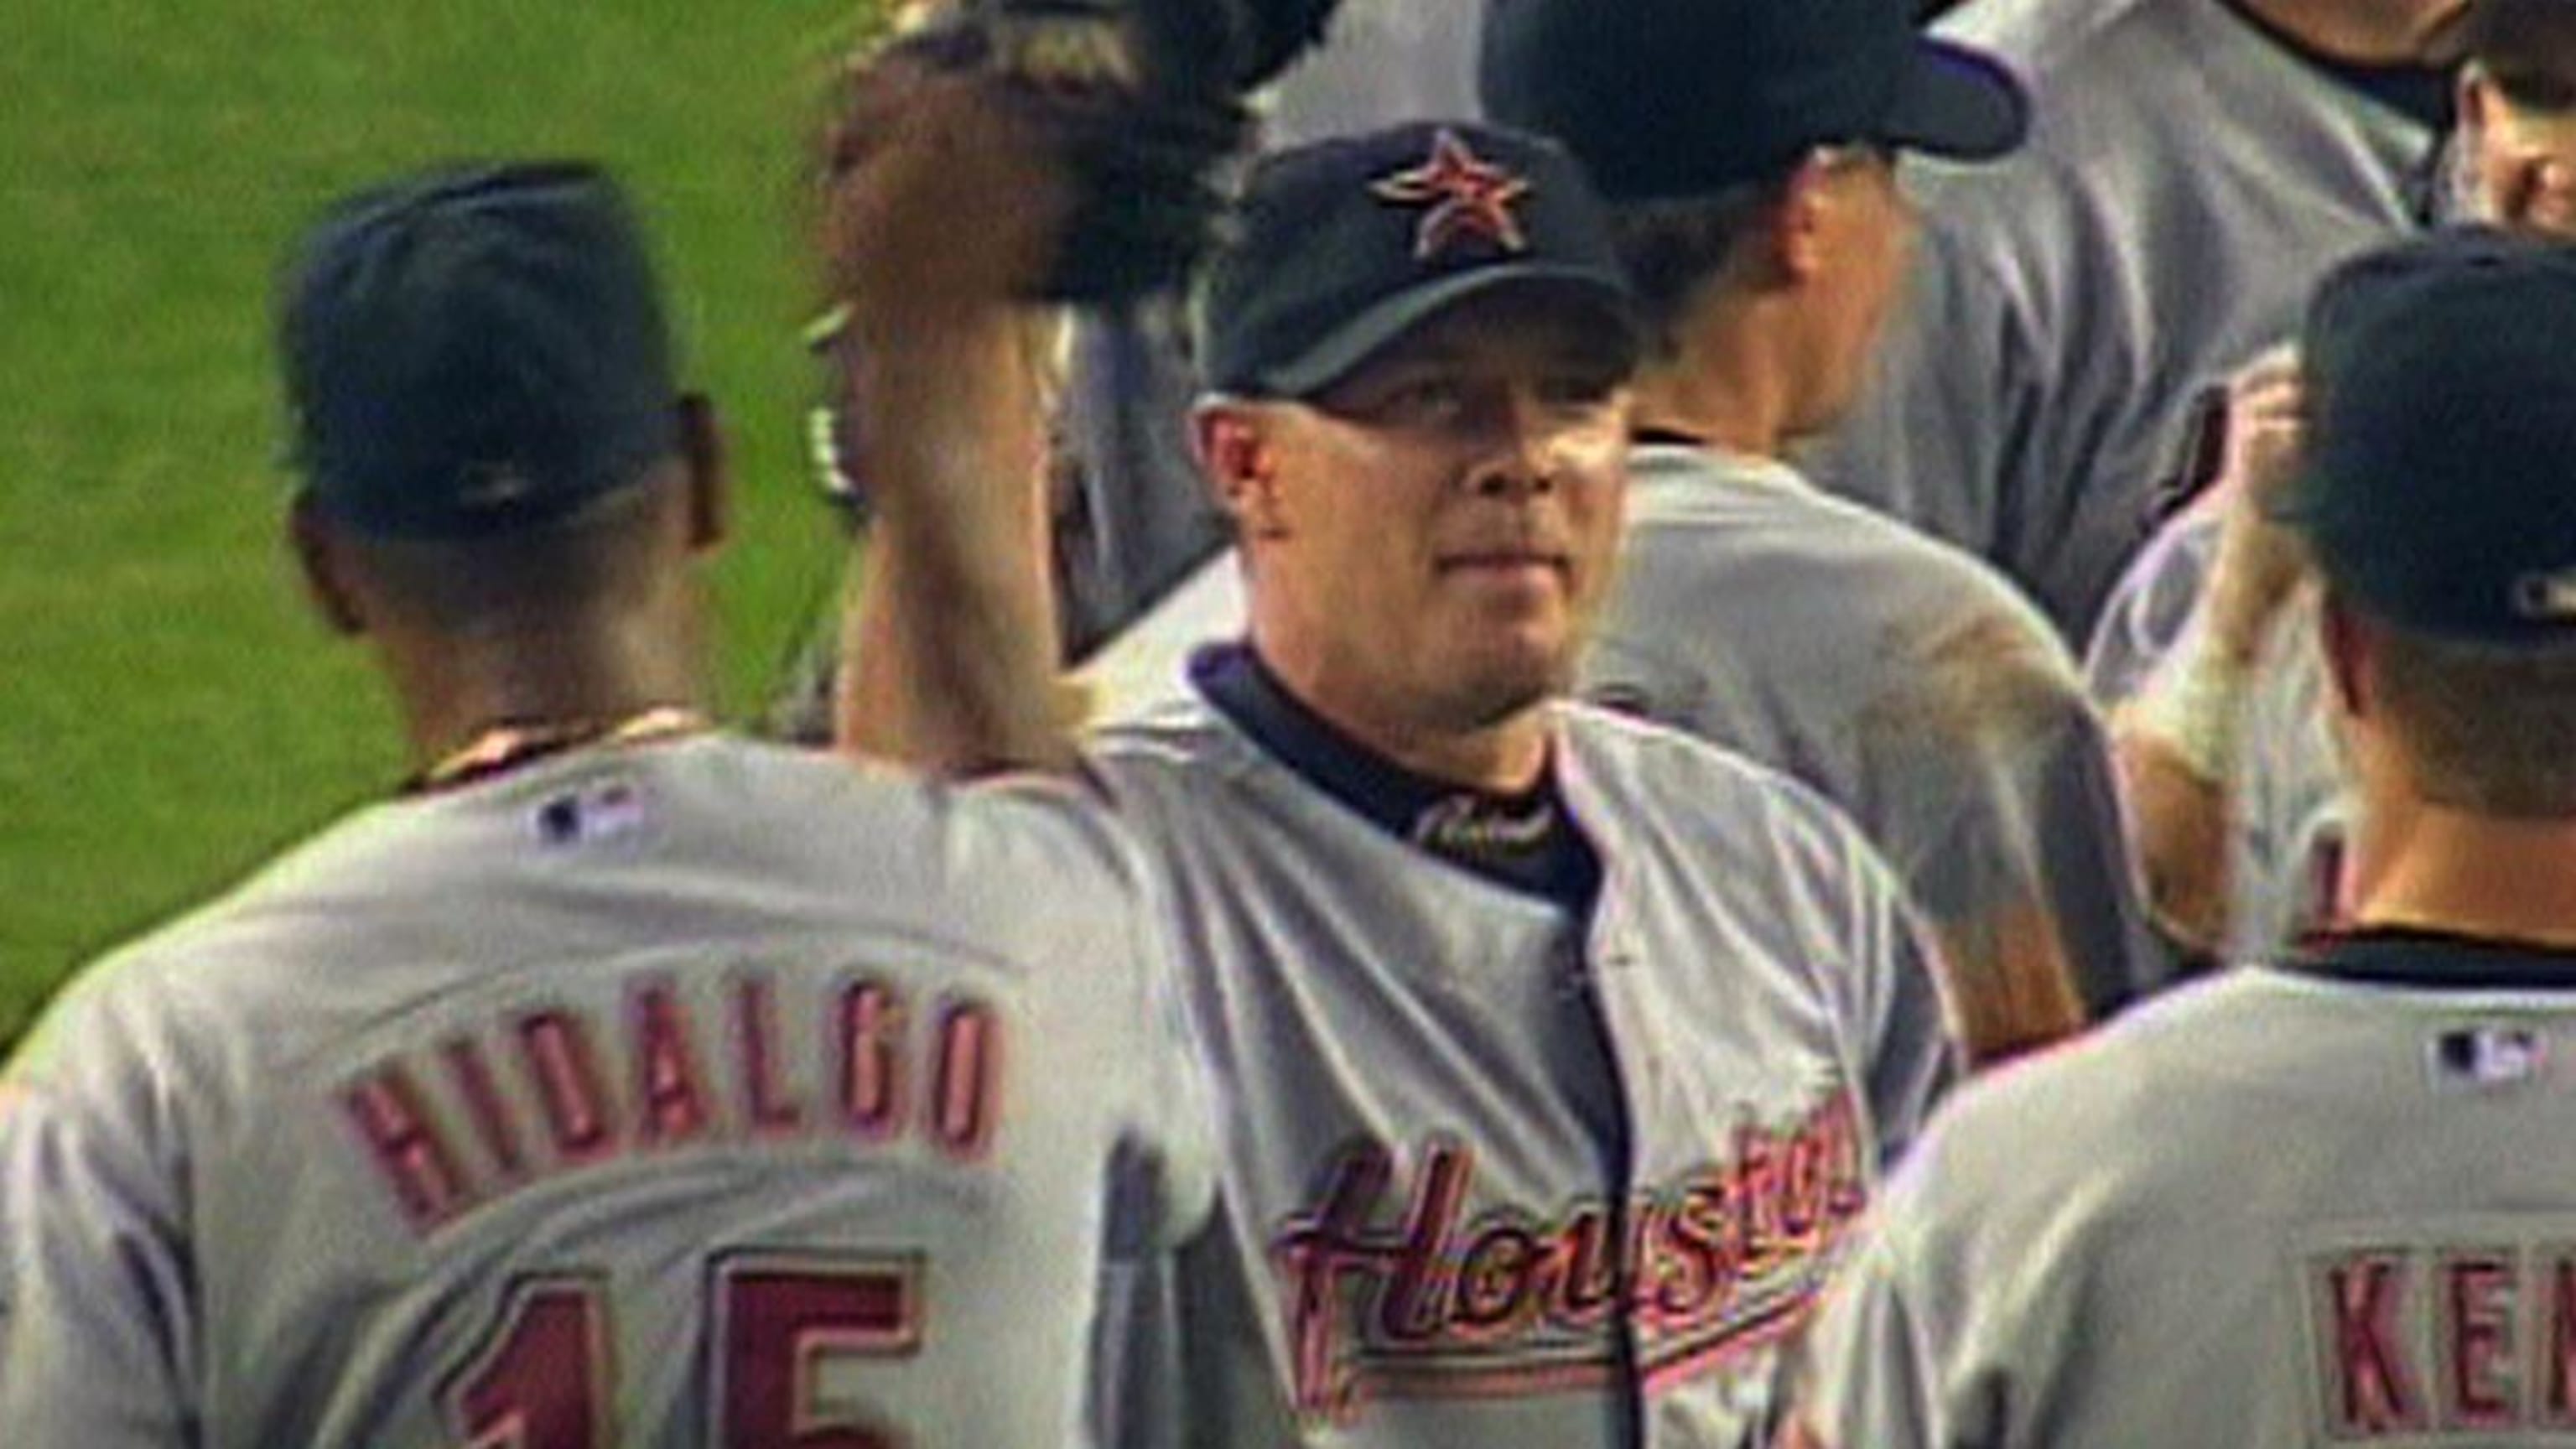 Billy Wagner – Society for American Baseball Research